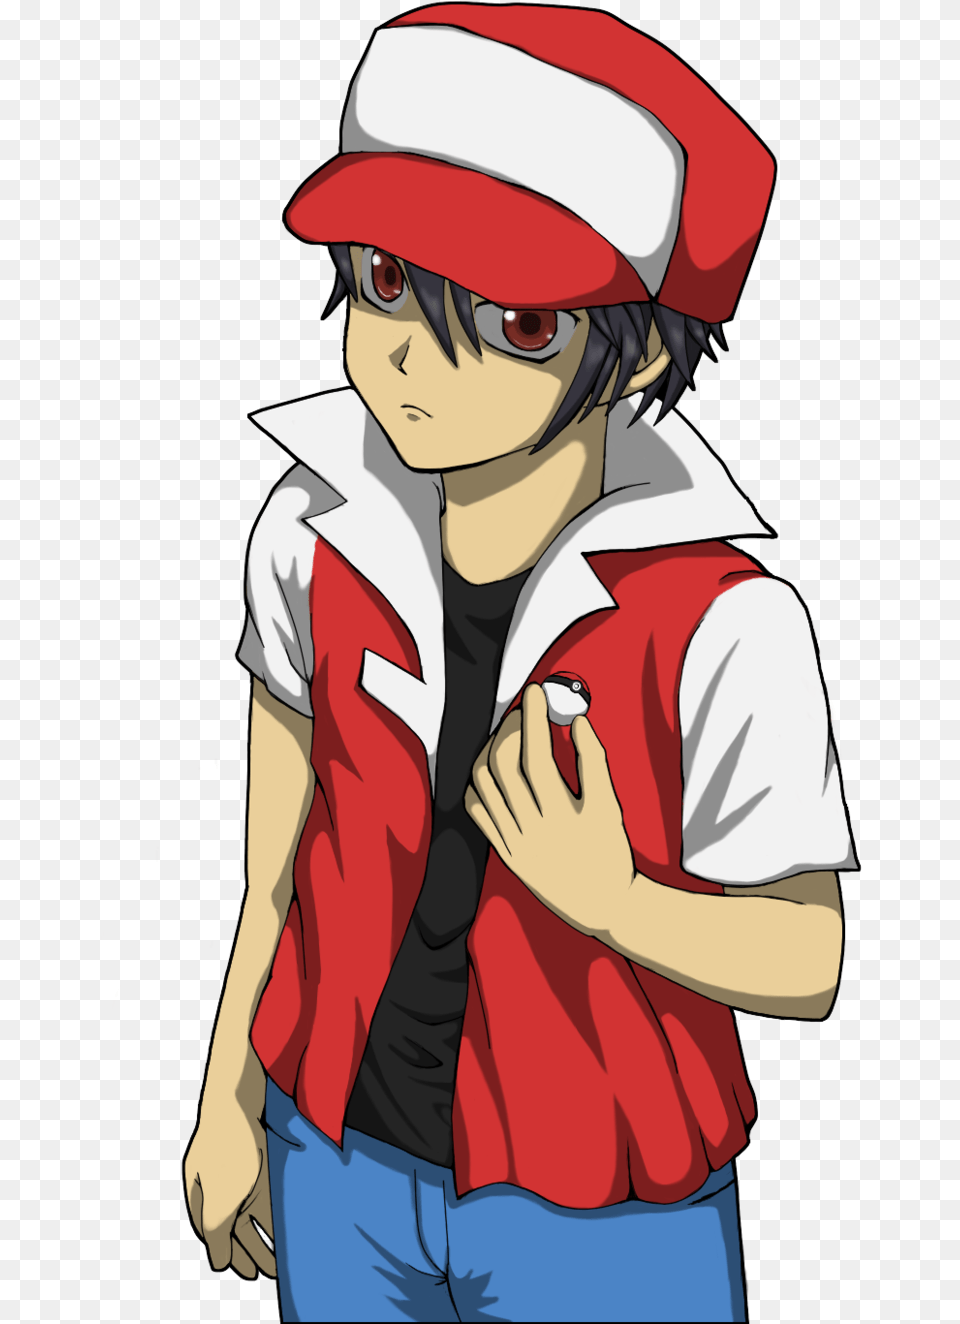 Pokemon Trainer Red Vector Royalty Pokemon Trainer Red, Book, Comics, Publication, Adult Png Image